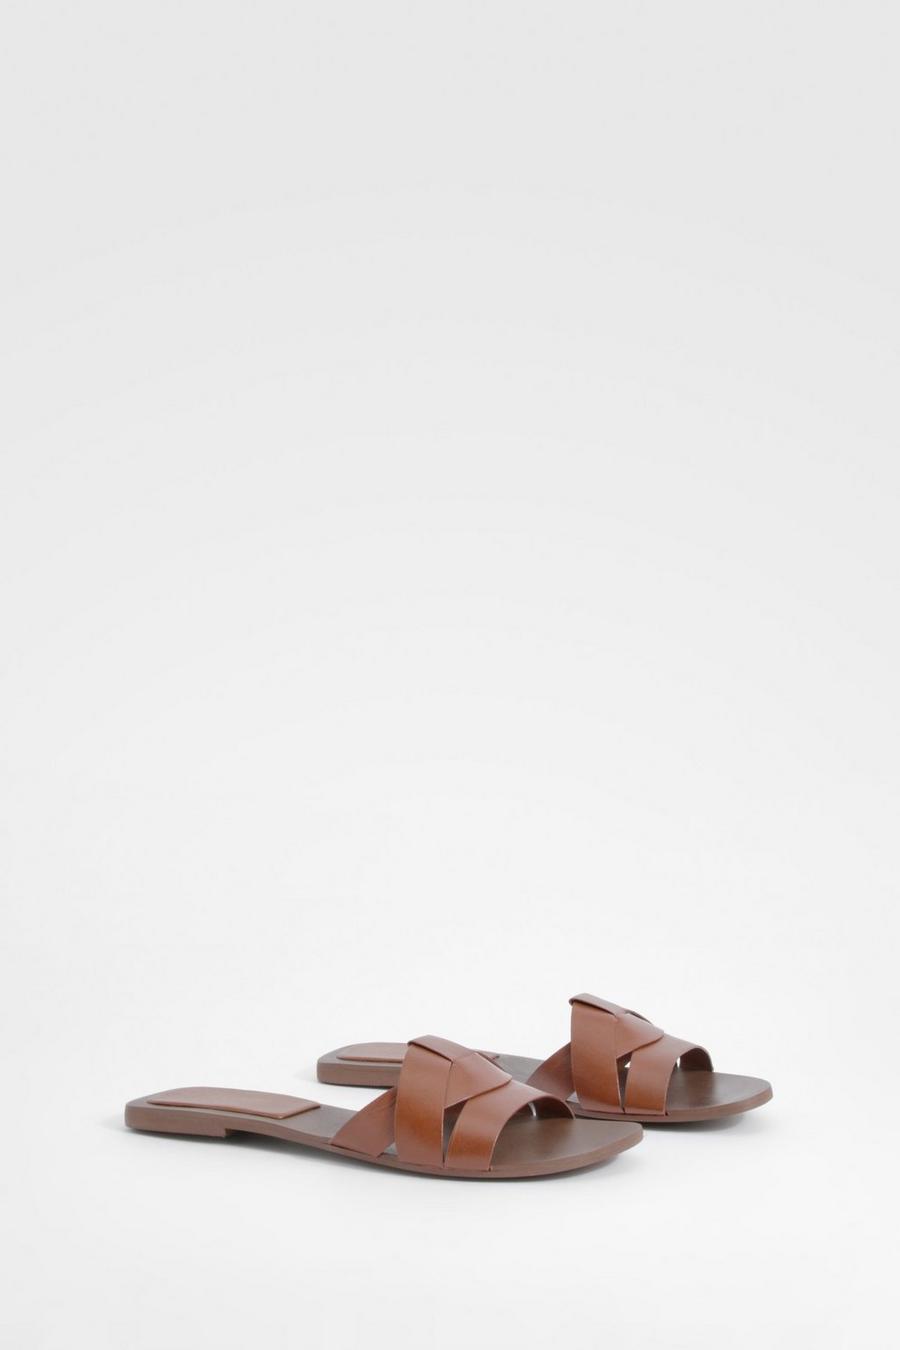 Tan Woven Leather Mule Sandals